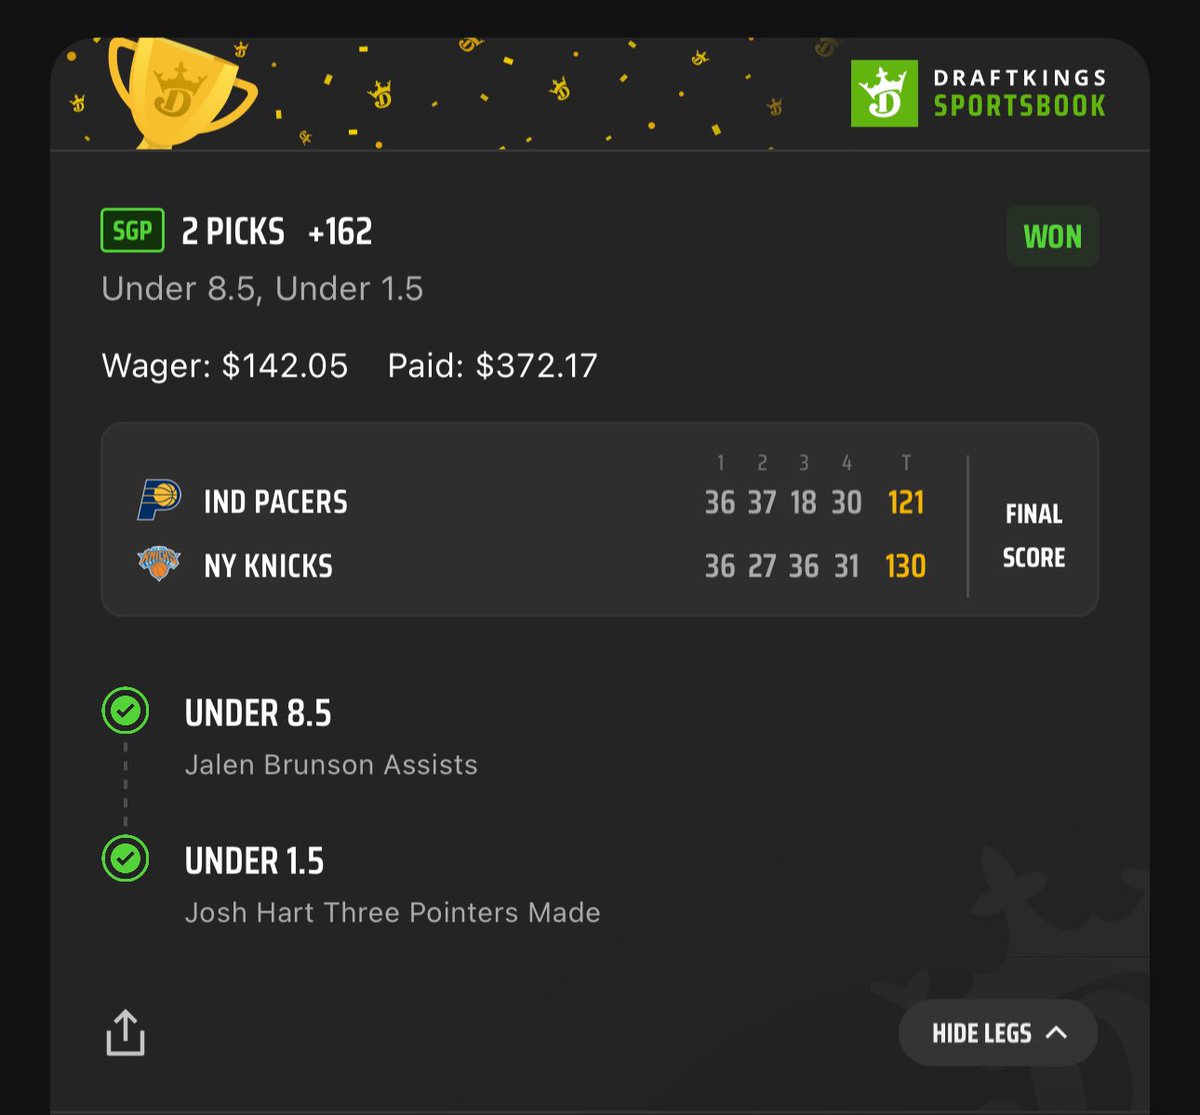 BANGGGGG✅✅✅

Nice SGP over on DraftKings to tuck us in after Turner chalked his points🚀

Leave a ❤️ & RT if you cashed
#GamblingTwitter #PlayerProps #PrizePicks #Like #Sportsbook #NBA #GamblingX #DraftKings #Fanduel #TrendingNow #Prizepickswinning